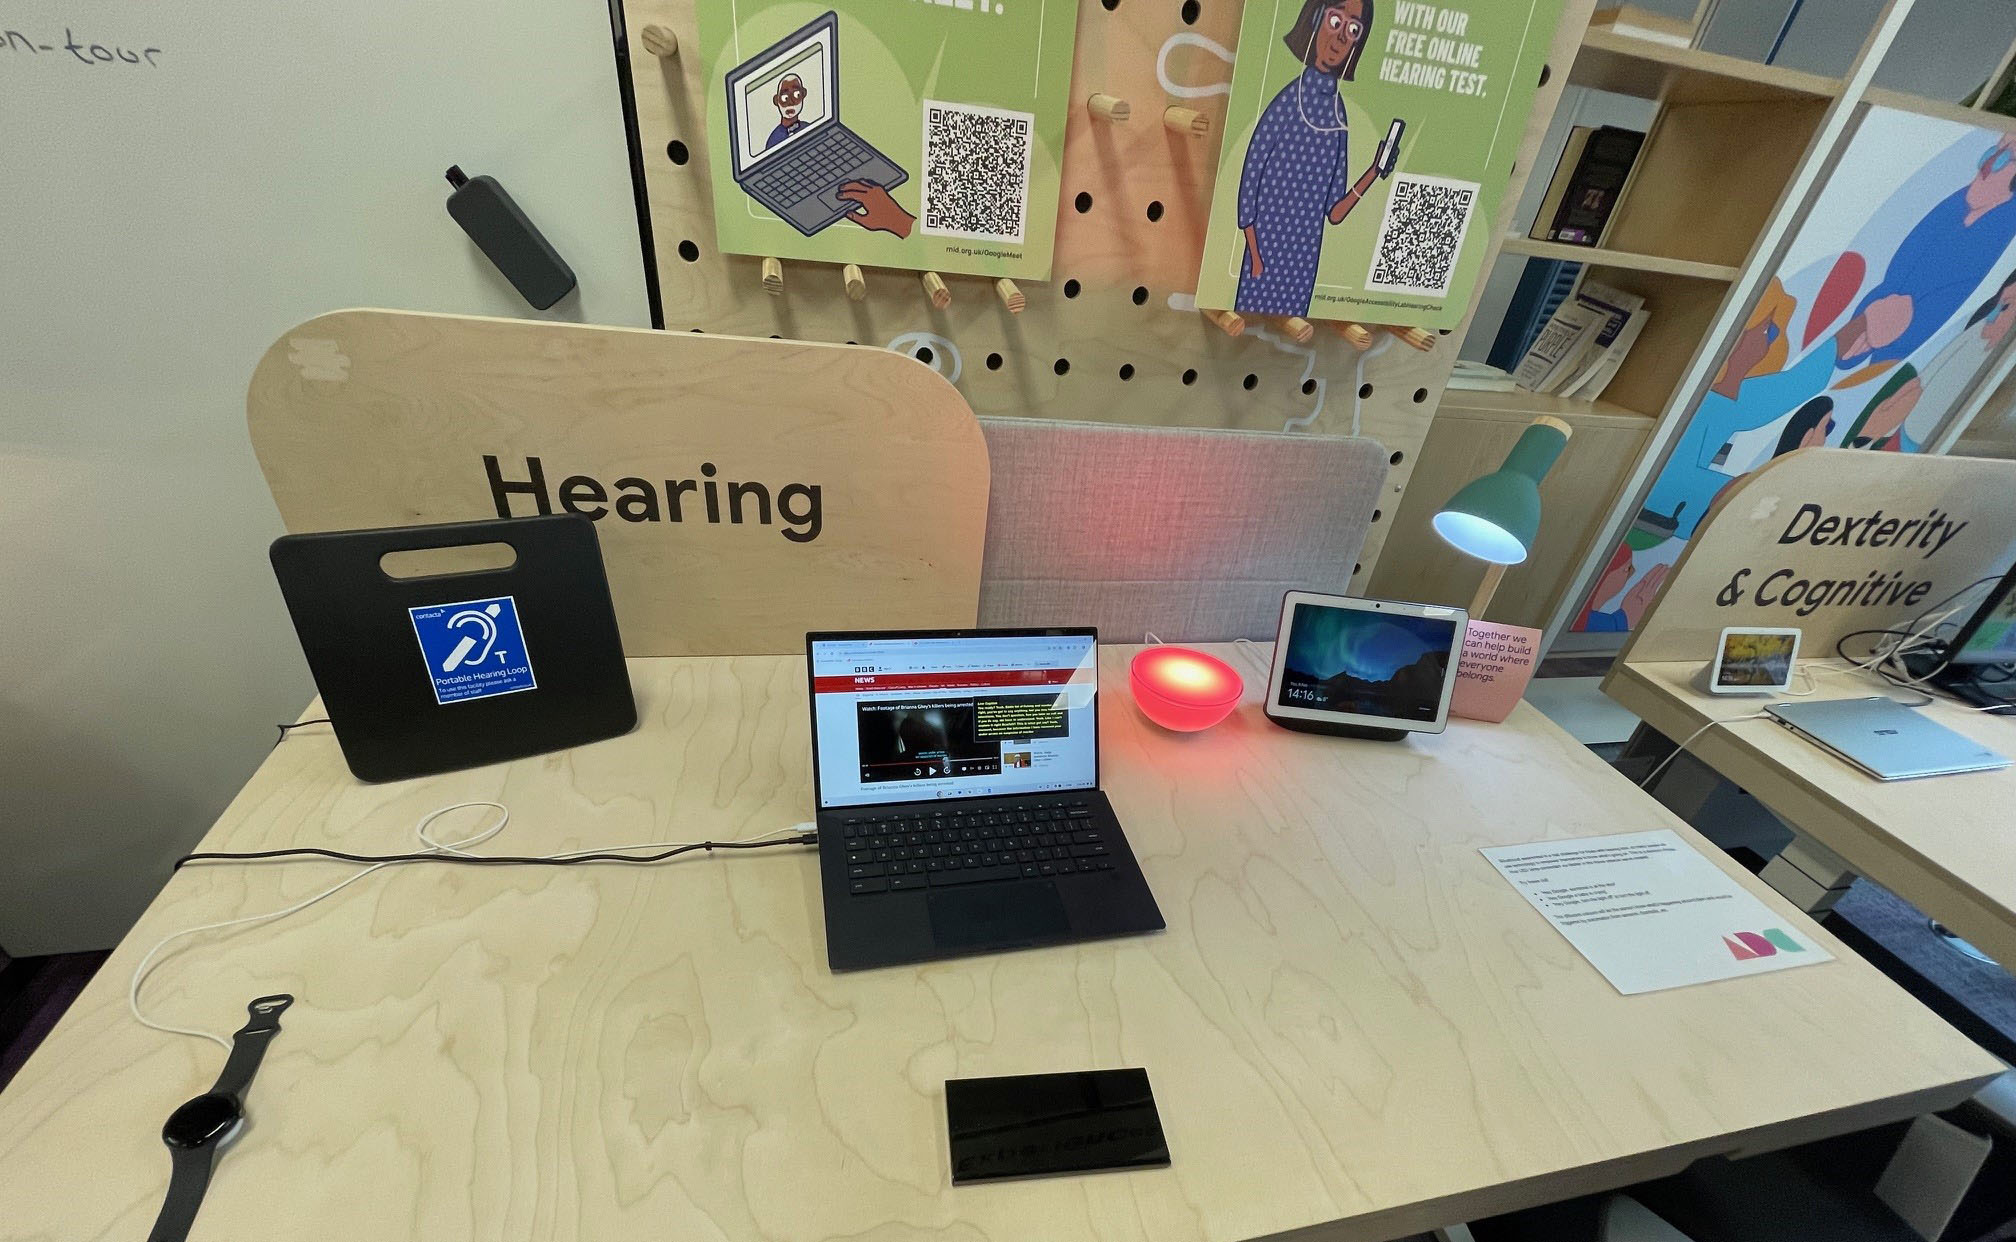 Hearing and 'Dexterity and cognitive' lab desks with lots of digital devices on display on a desk